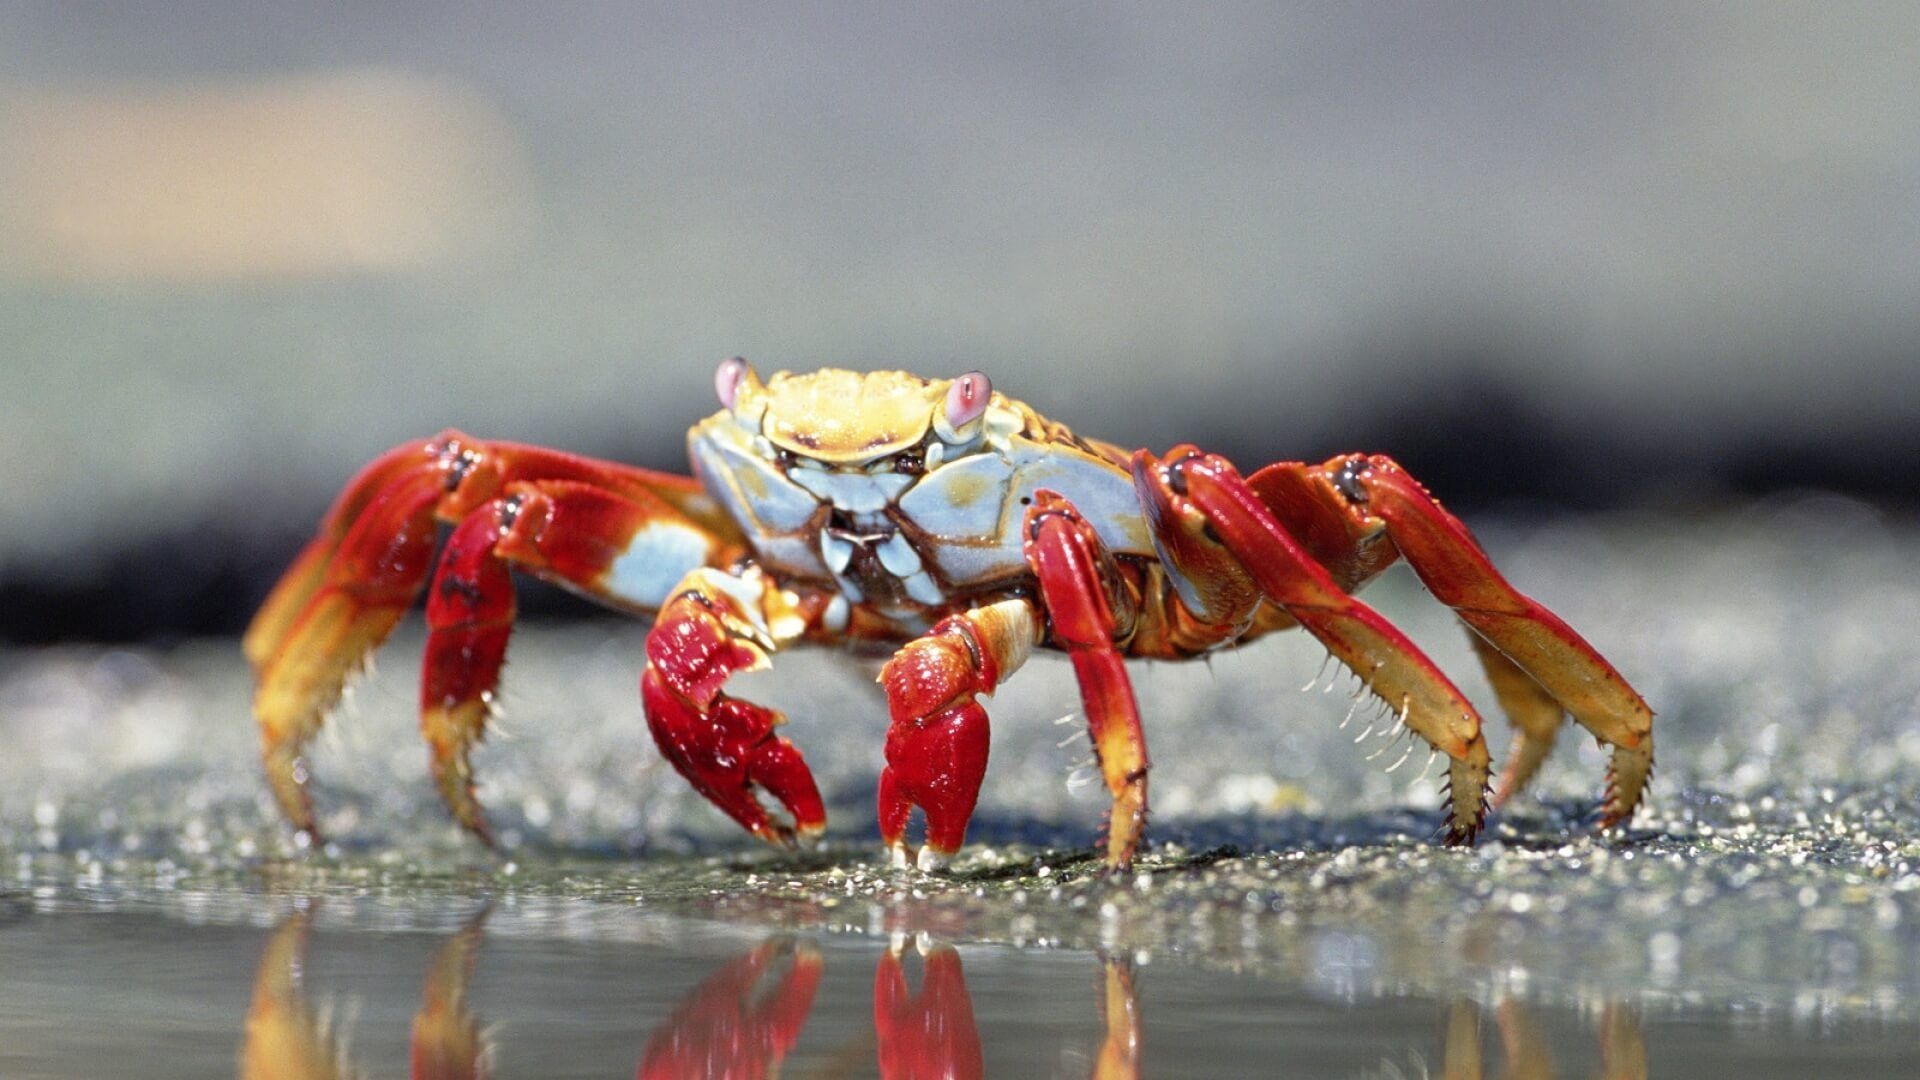 Crab: Have modified appendages called maxillipeds that are used for feeding. 1920x1080 Full HD Wallpaper.